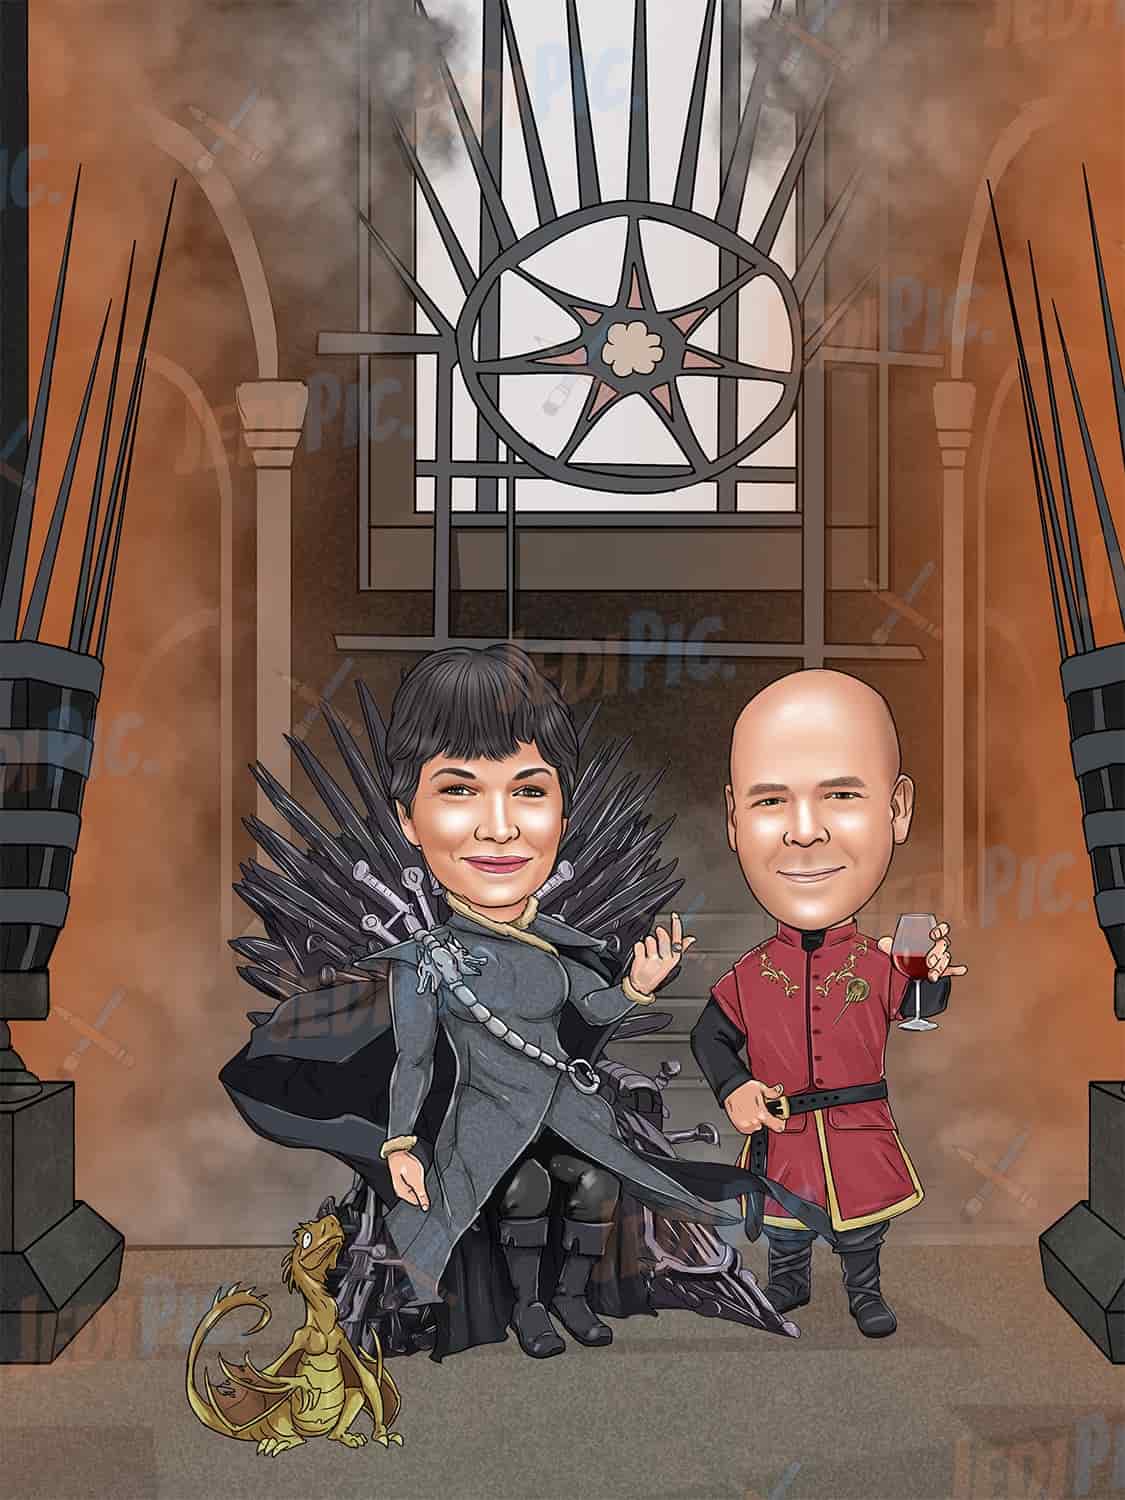 Movies Caricature for Game of Thrones Fans